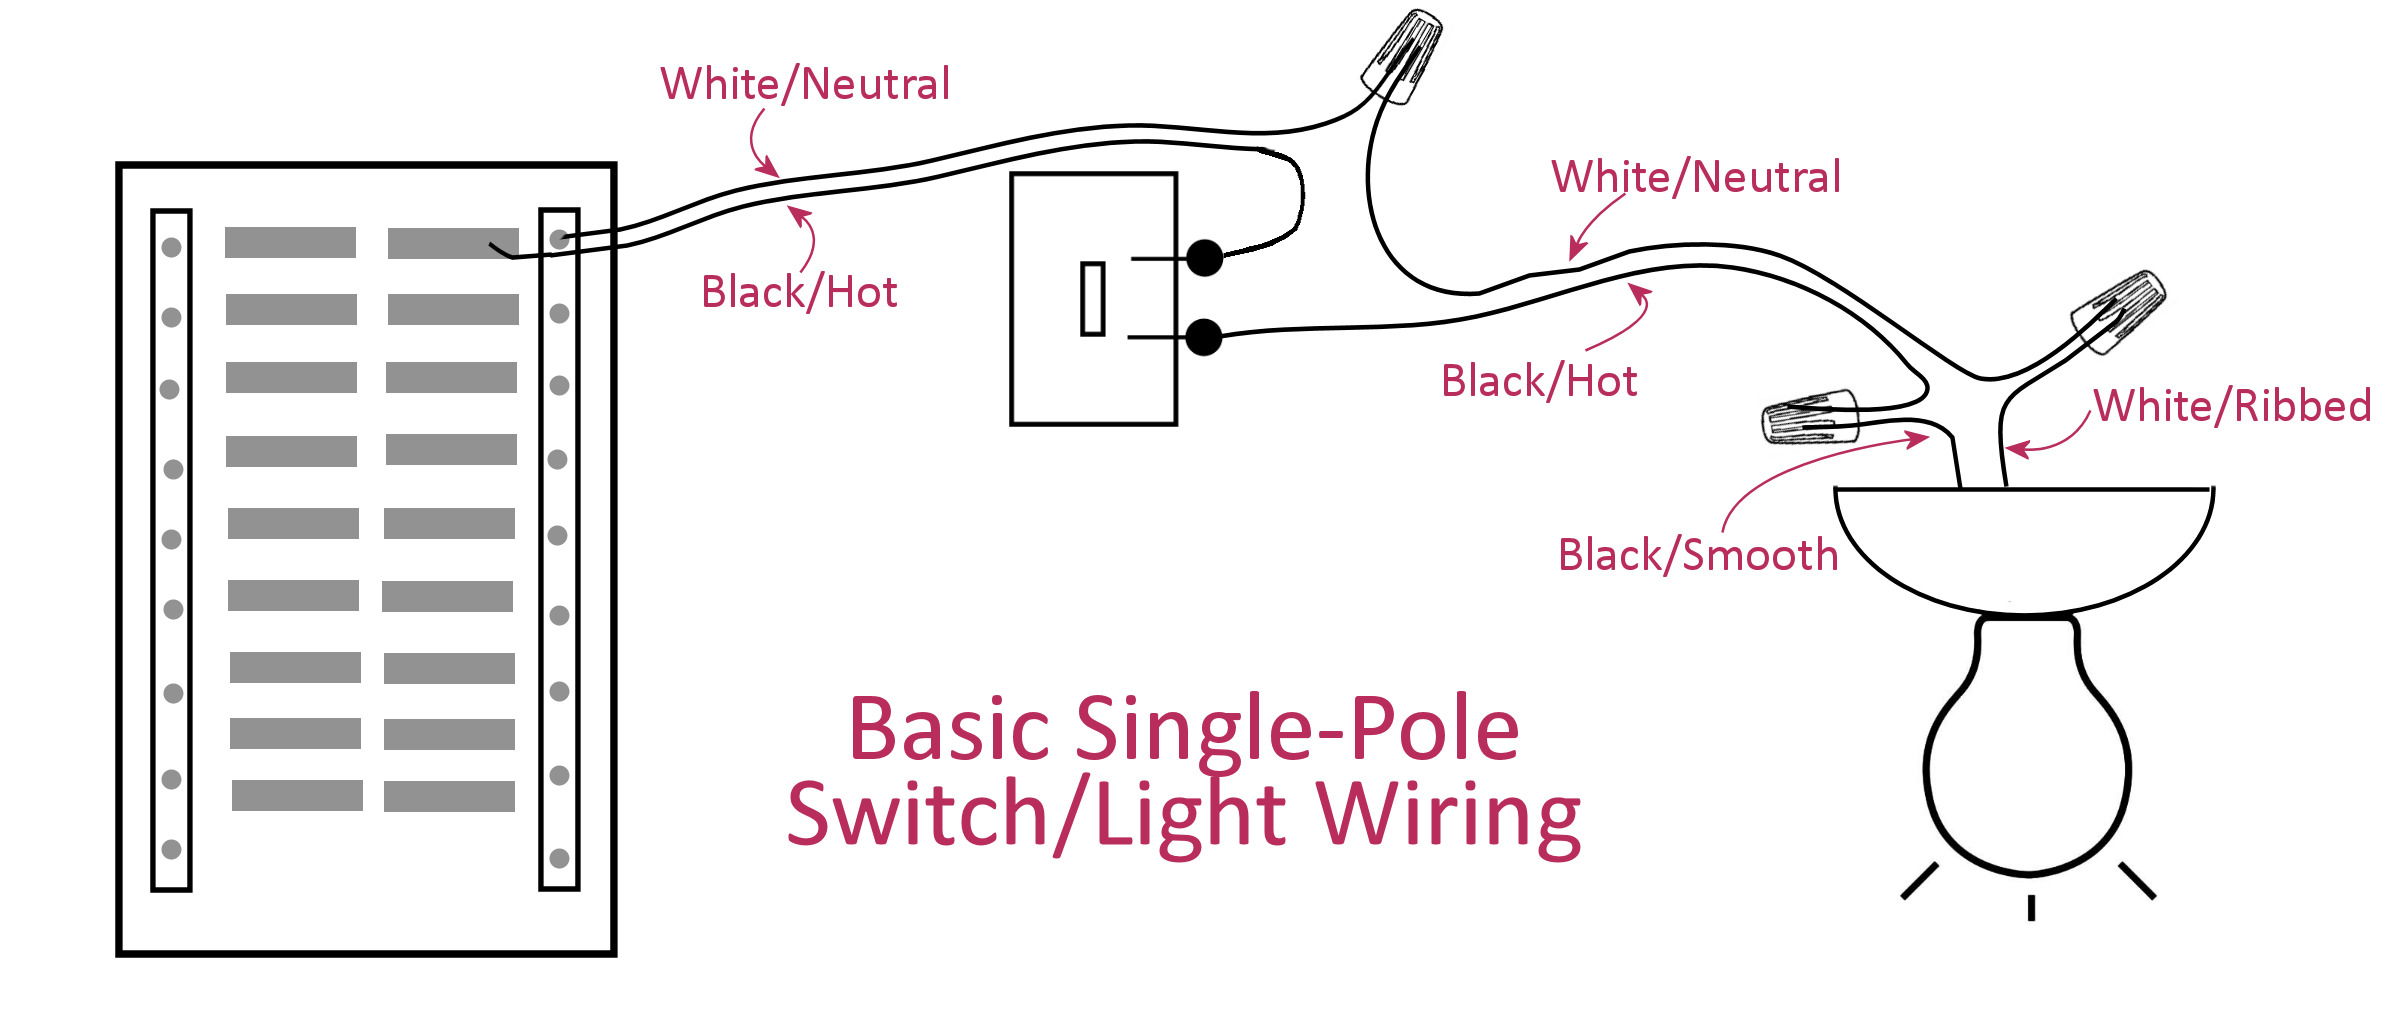 Multiple Light Wiring Diagram from www.addicted2decorating.com